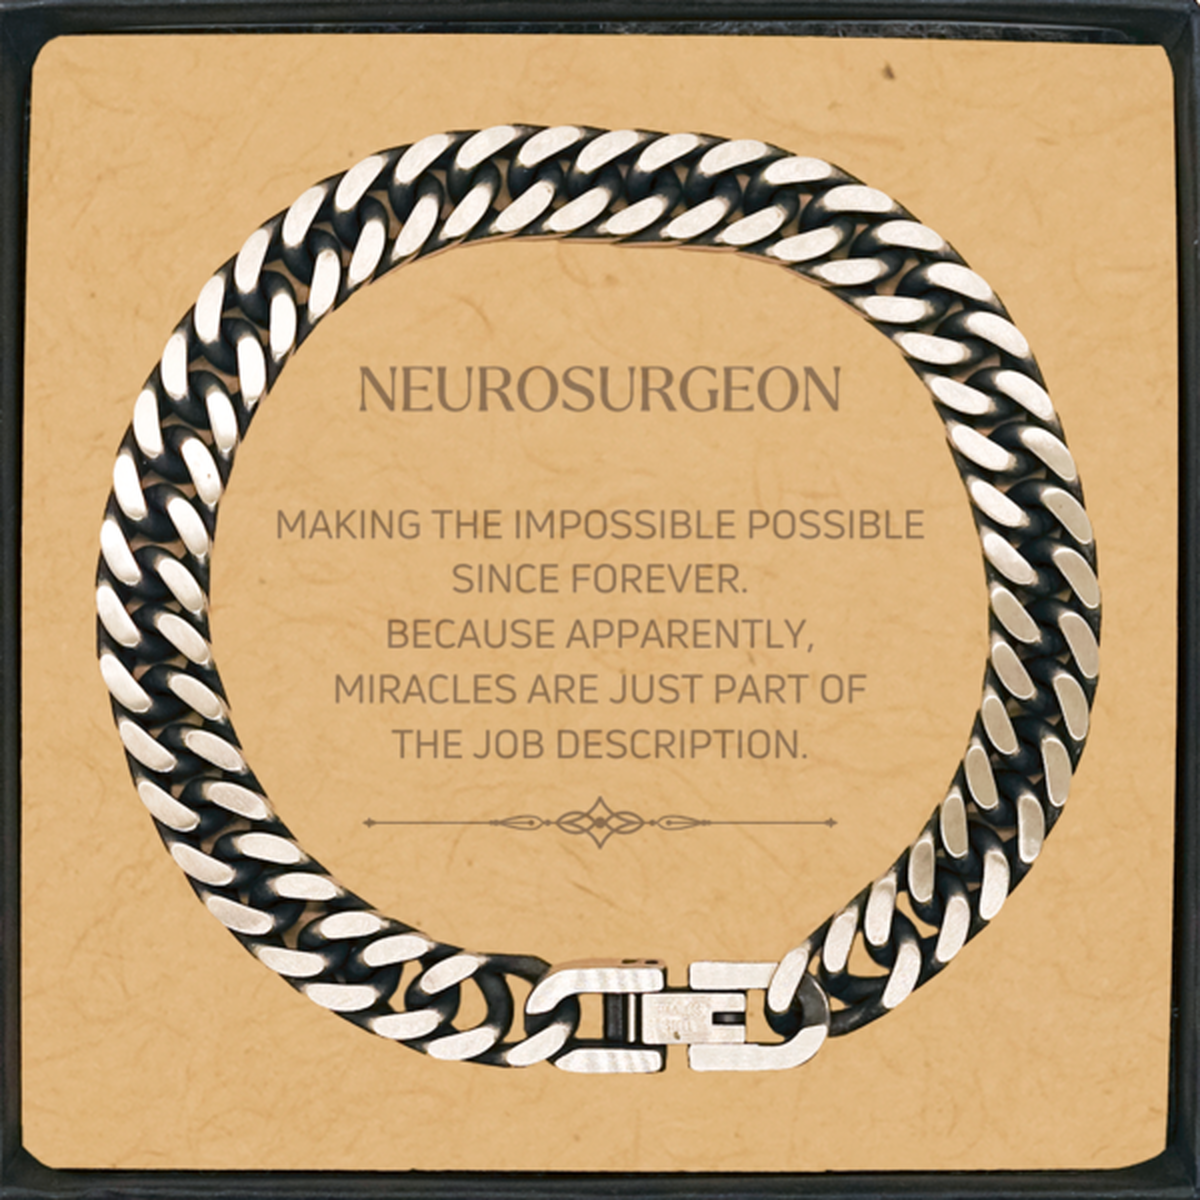 Funny Neurosurgeon Gifts, Miracles are just part of the job description, Inspirational Birthday Cuban Link Chain Bracelet For Neurosurgeon, Men, Women, Coworkers, Friends, Boss